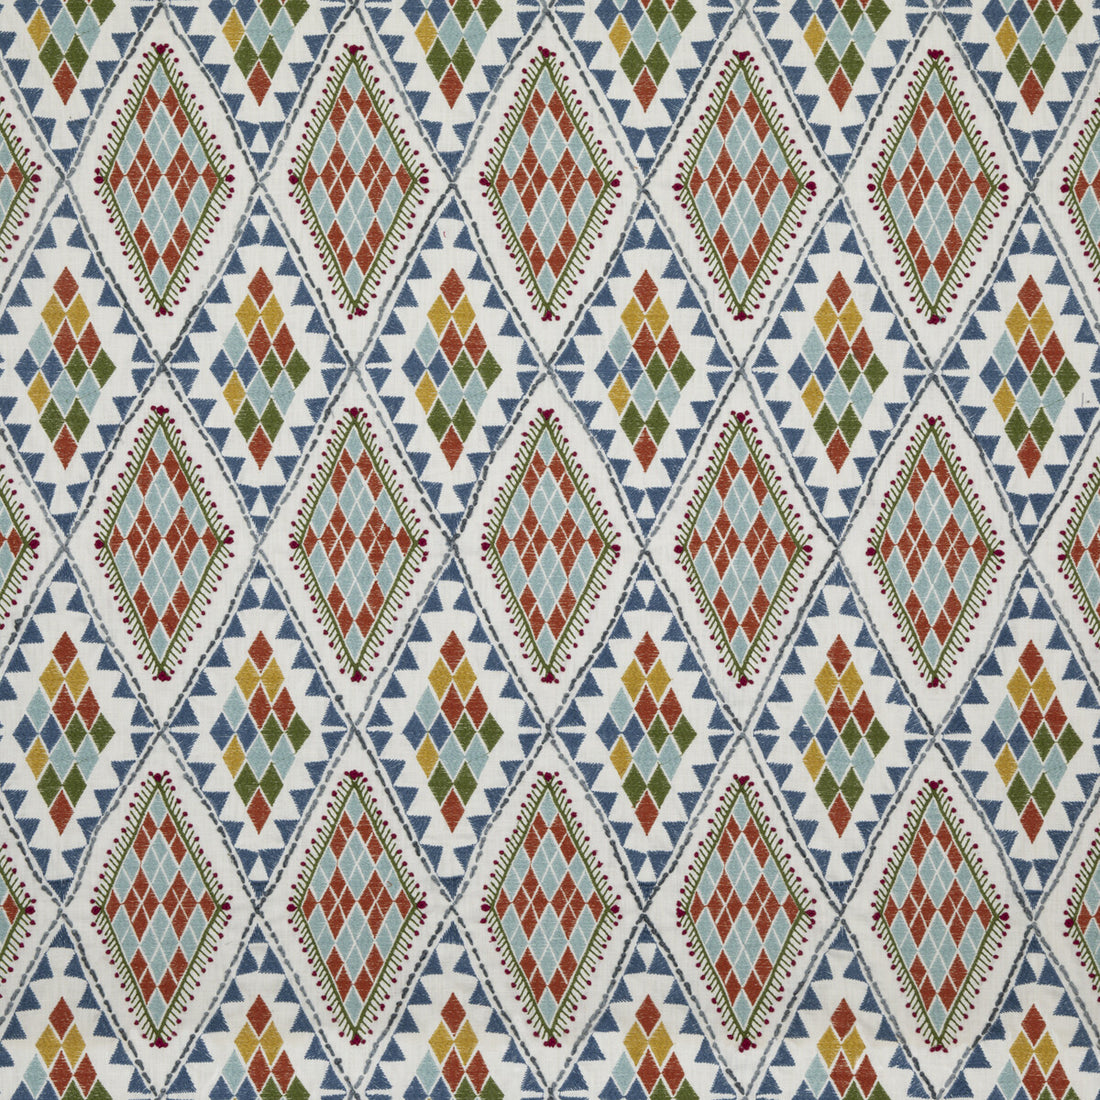 Castelo fabric in multi color - pattern PF50443.2.0 - by Baker Lifestyle in the Homes &amp; Gardens III collection